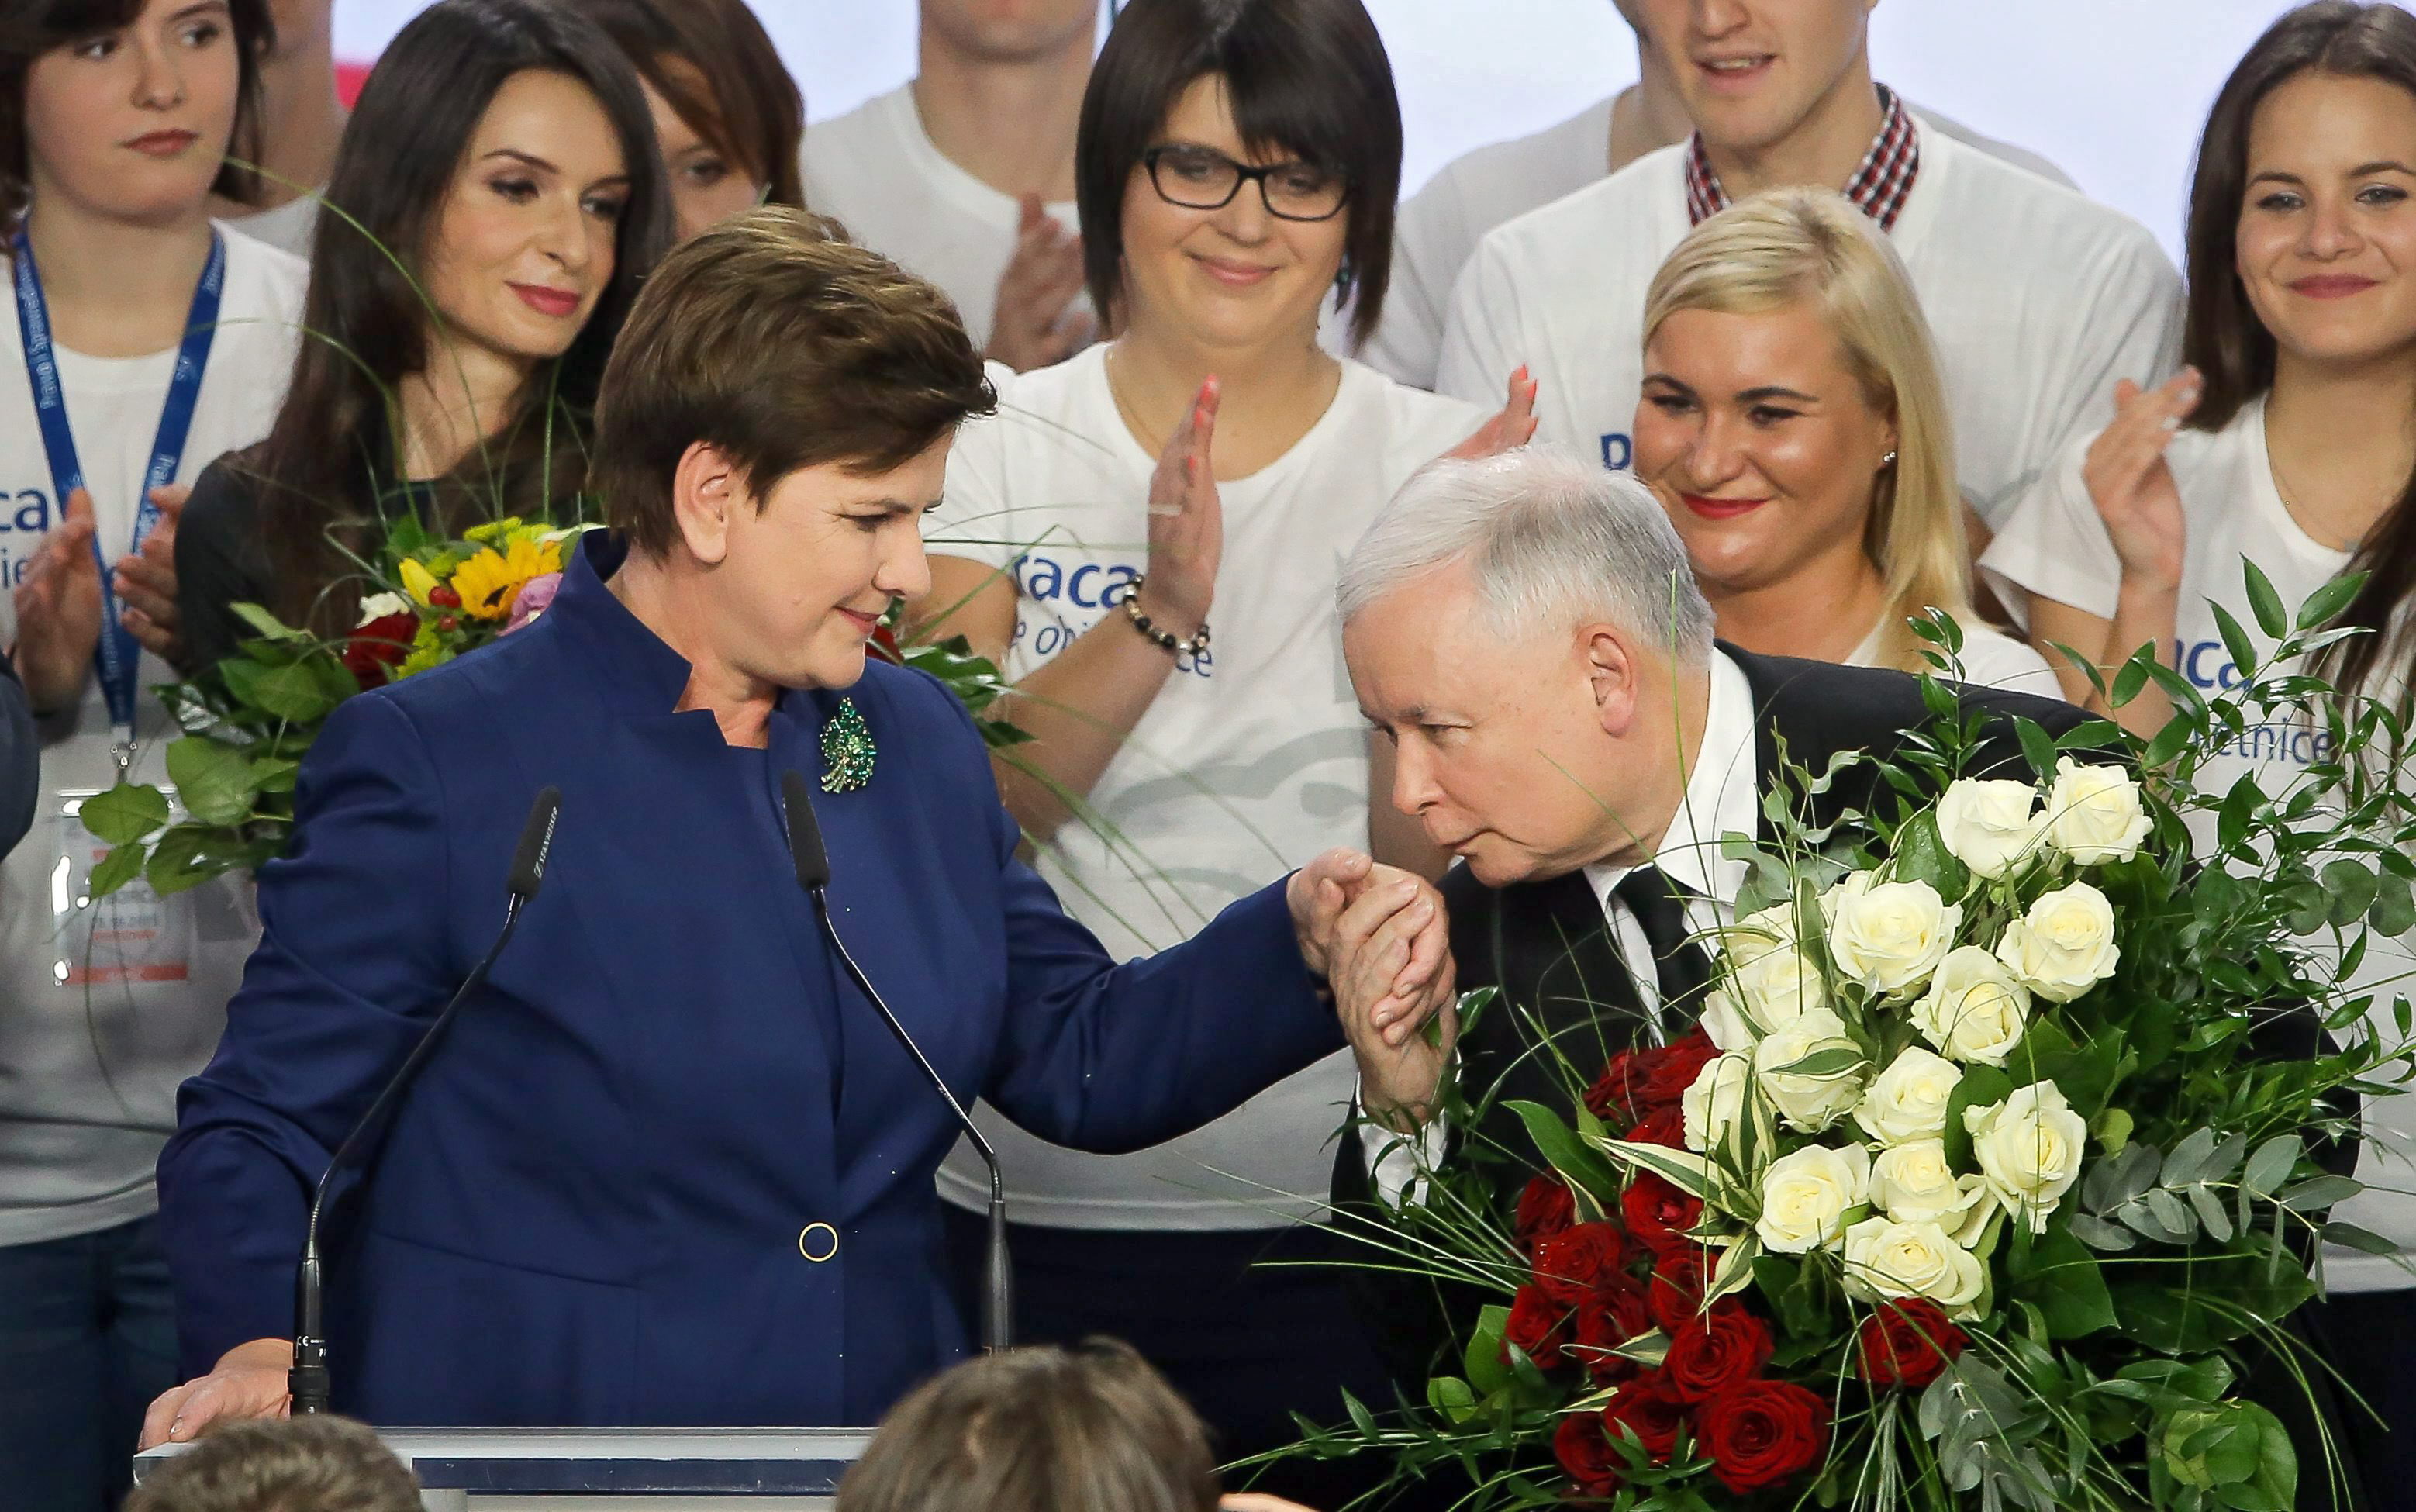 Parliamentary elections in Poland